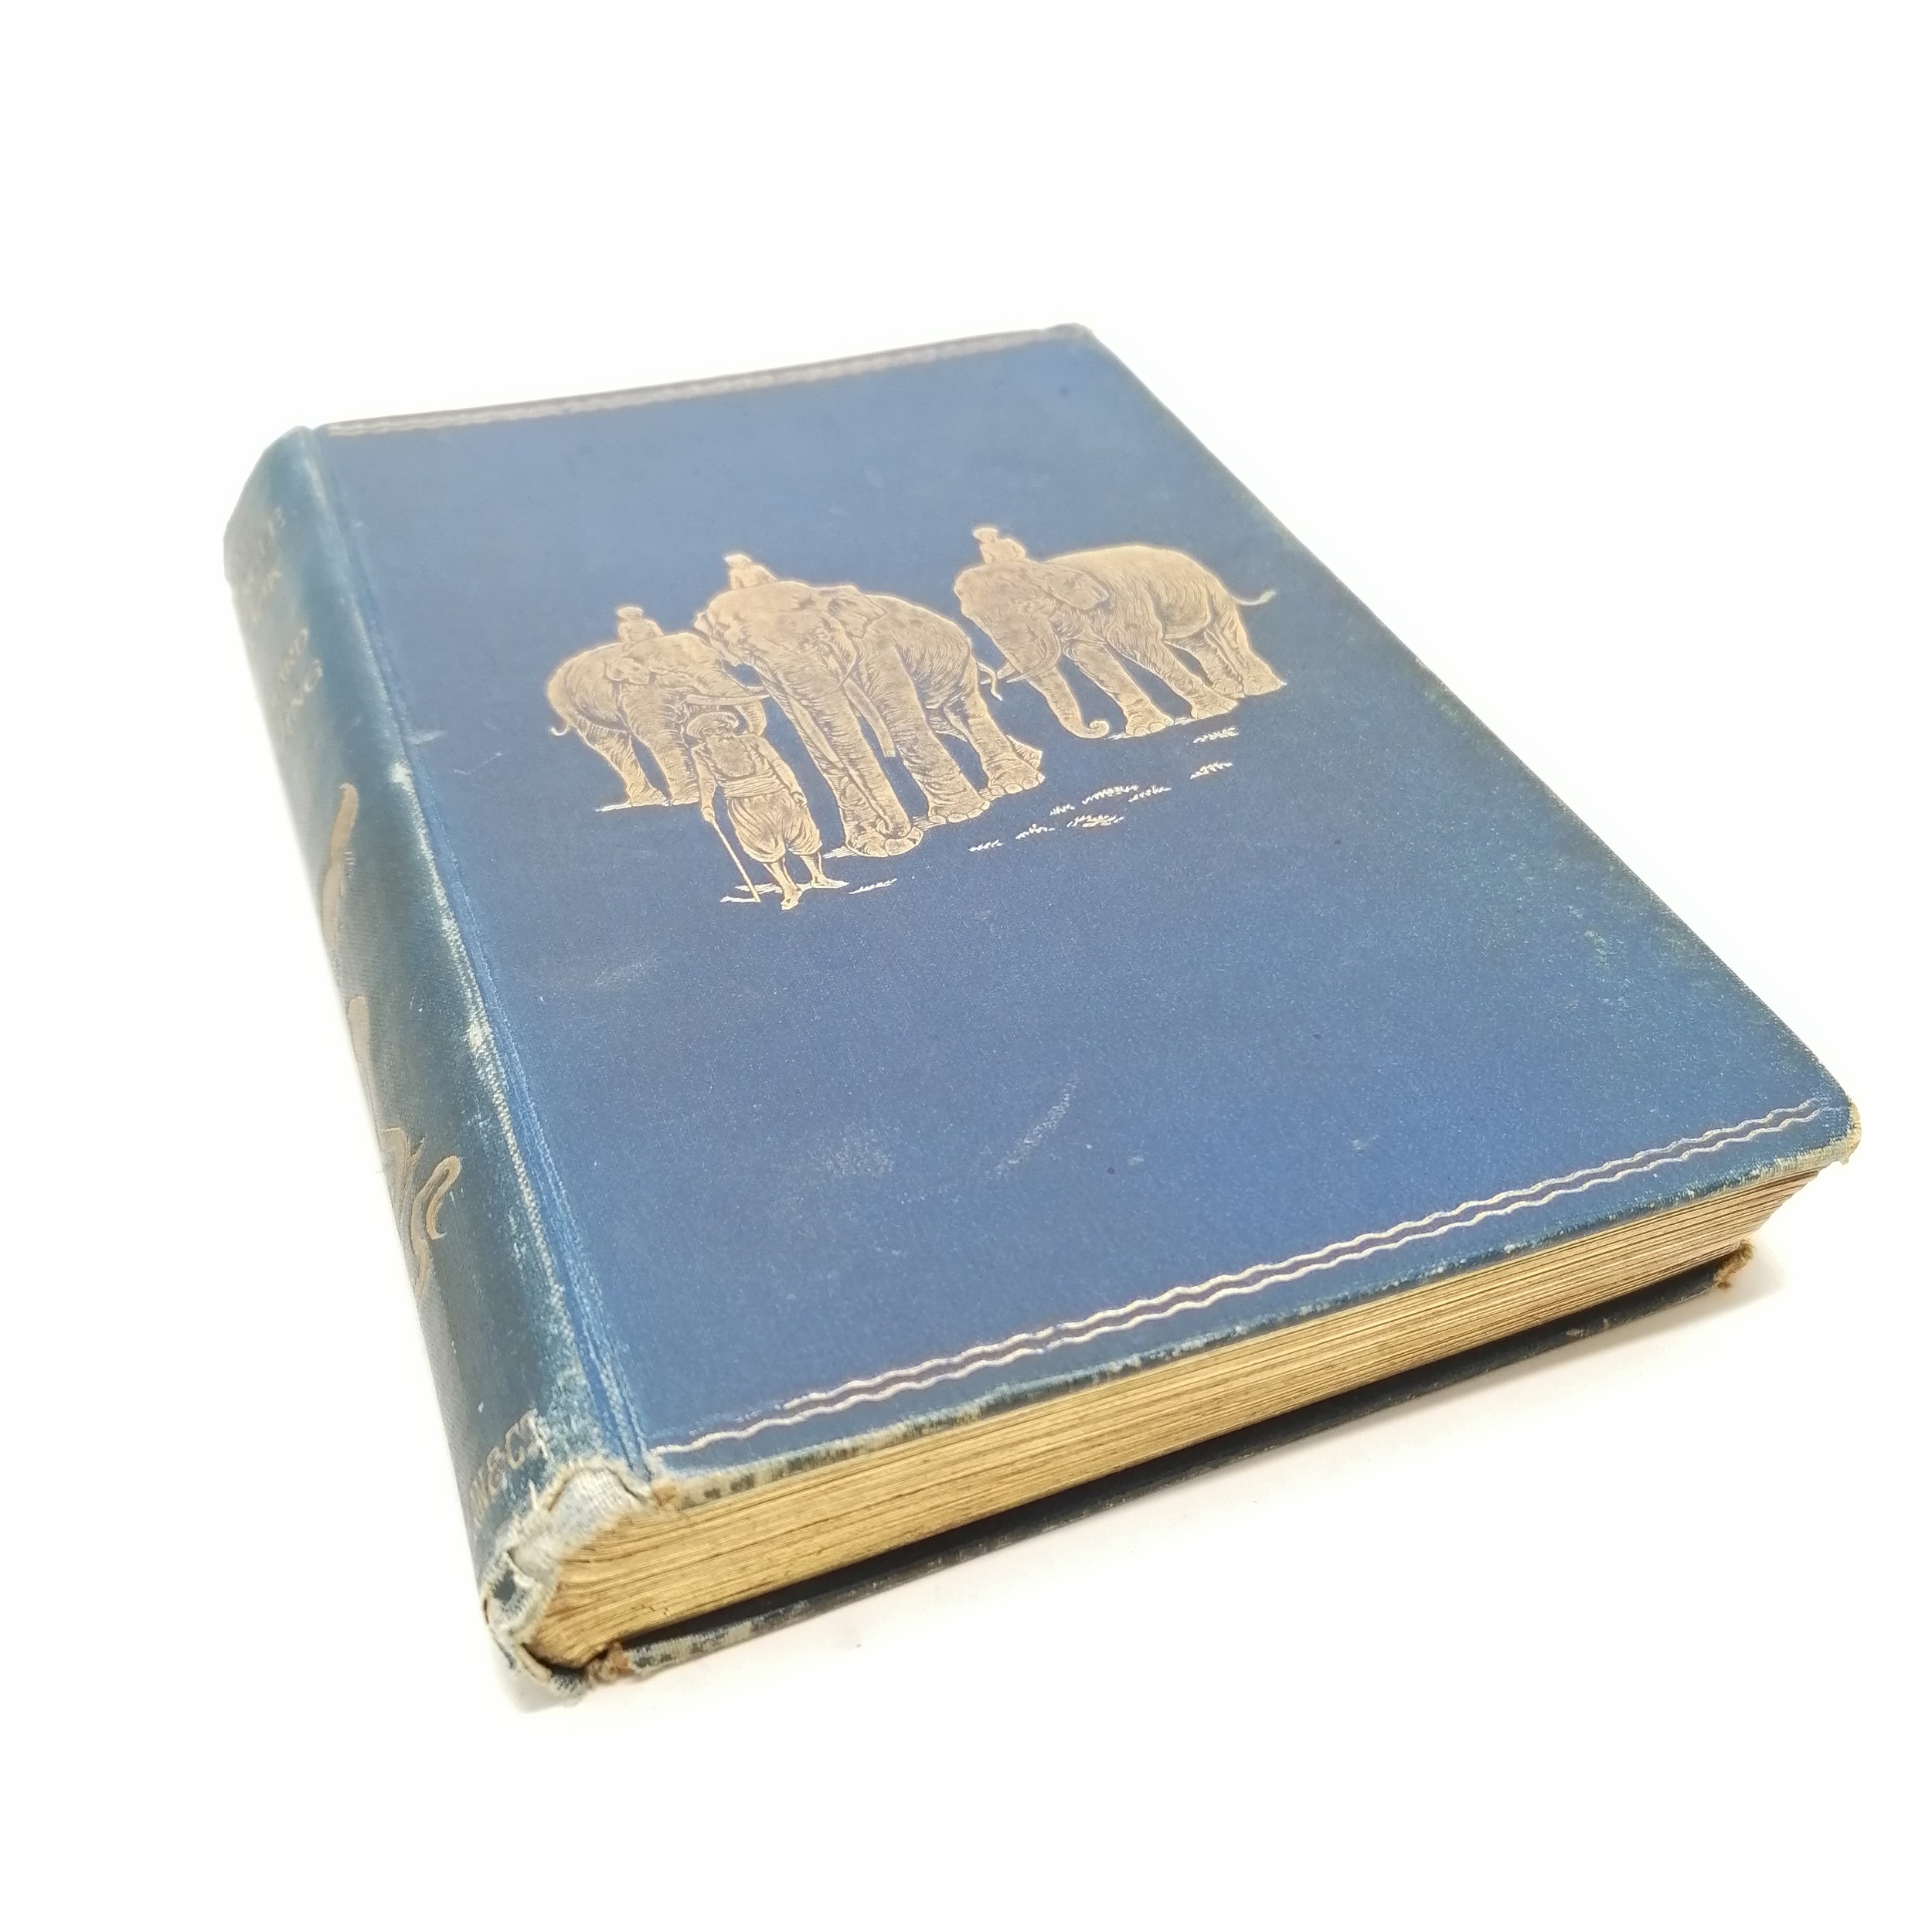 1895 book - The Jungle Book by Rudyard Kipling ~ coming away from spine and has some wear - Image 7 of 7